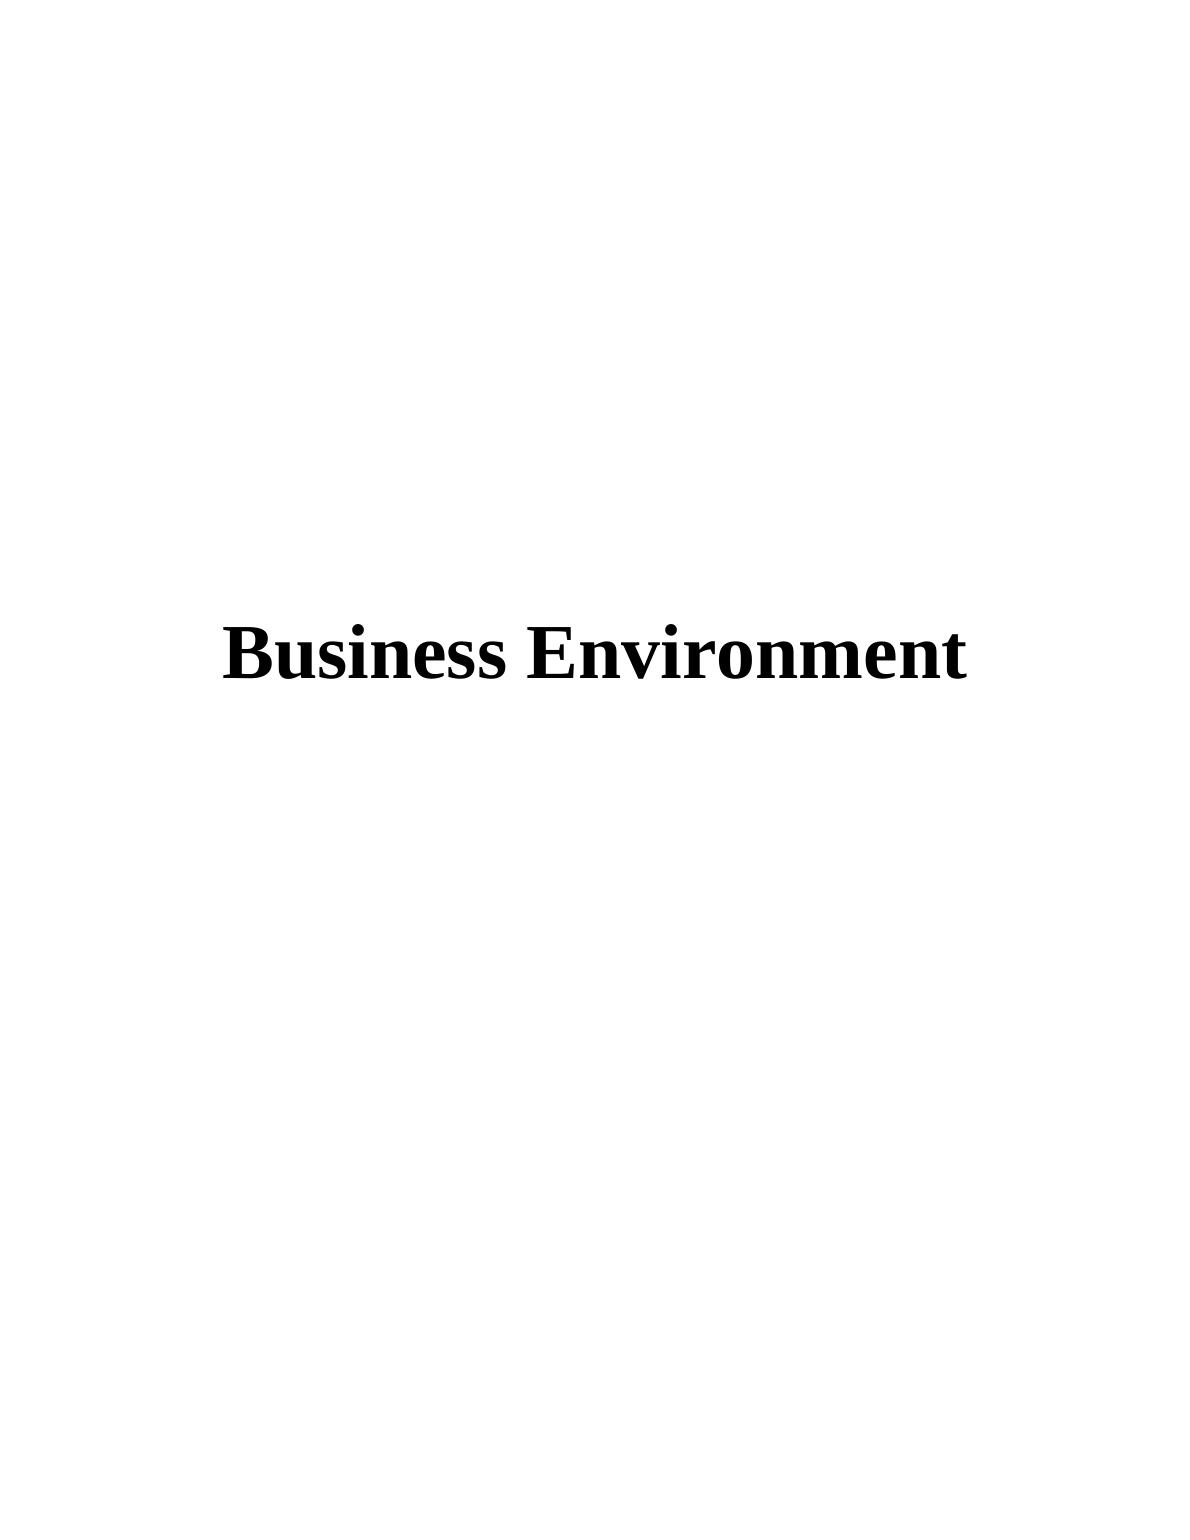 Business Environment of IBM : Report_1